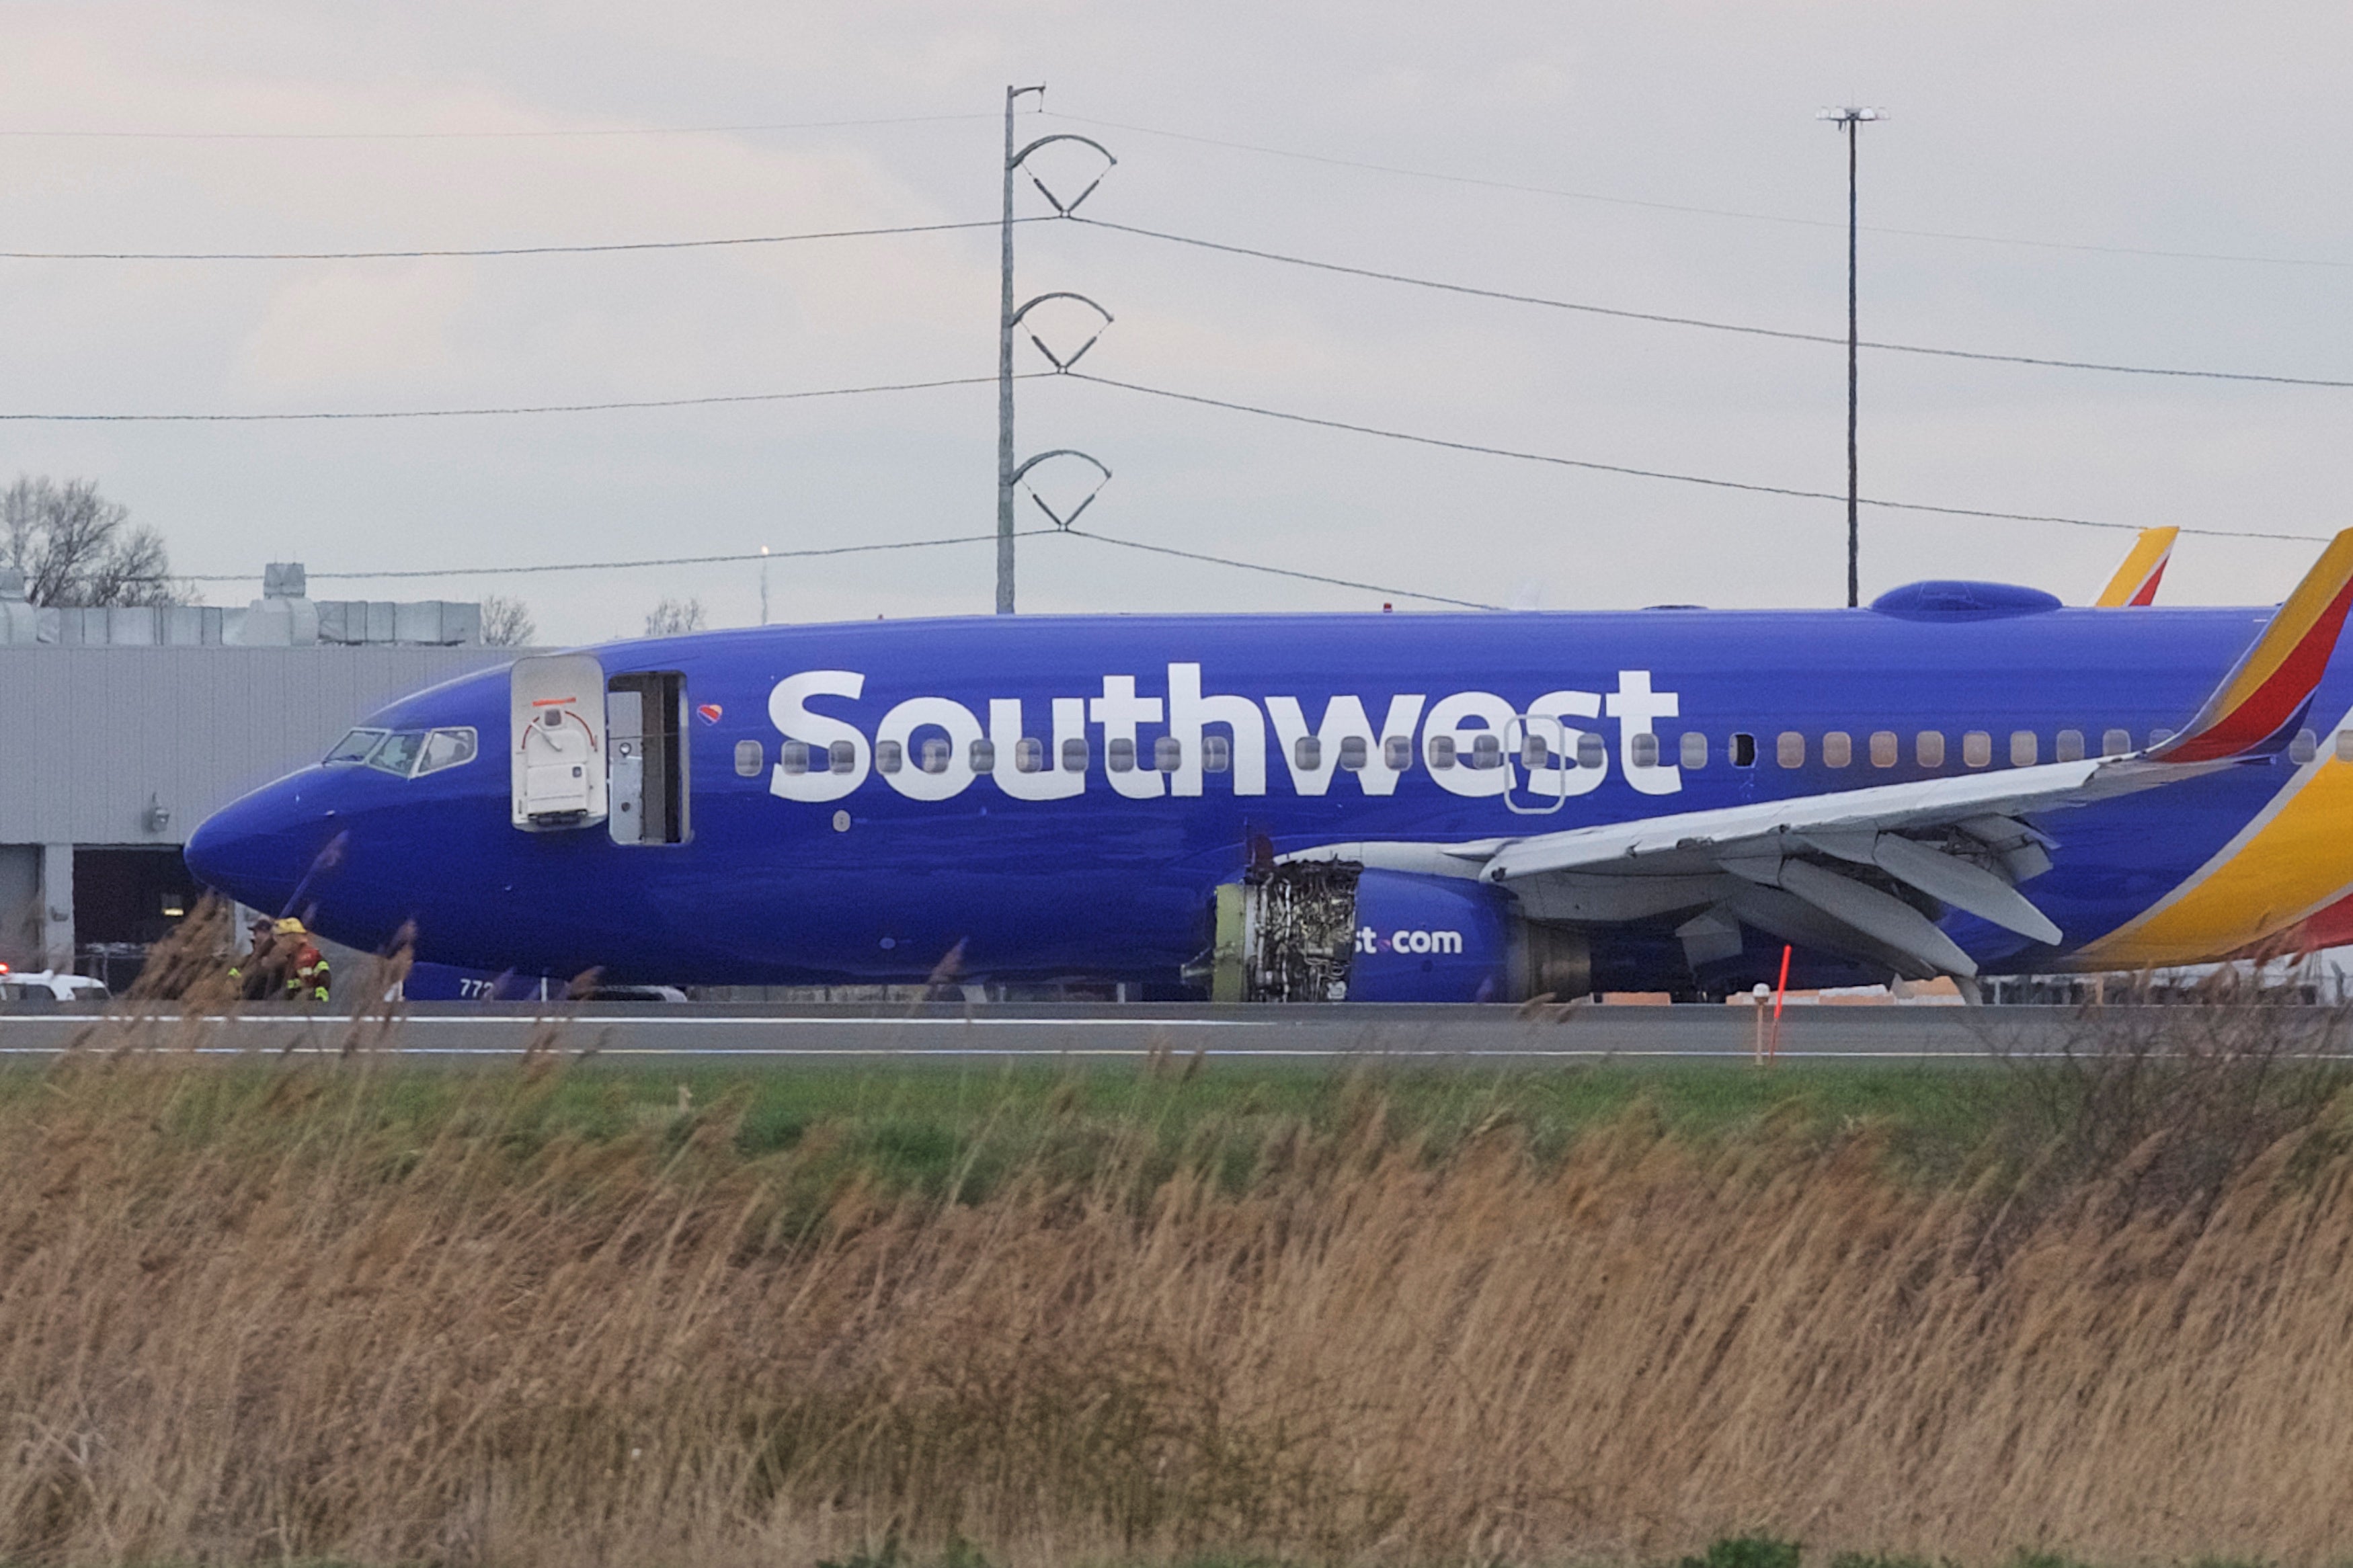 The Southwest Airlines plane that made an emergency landing in Philadelphia Tuesday. A window on its left side is broken out.